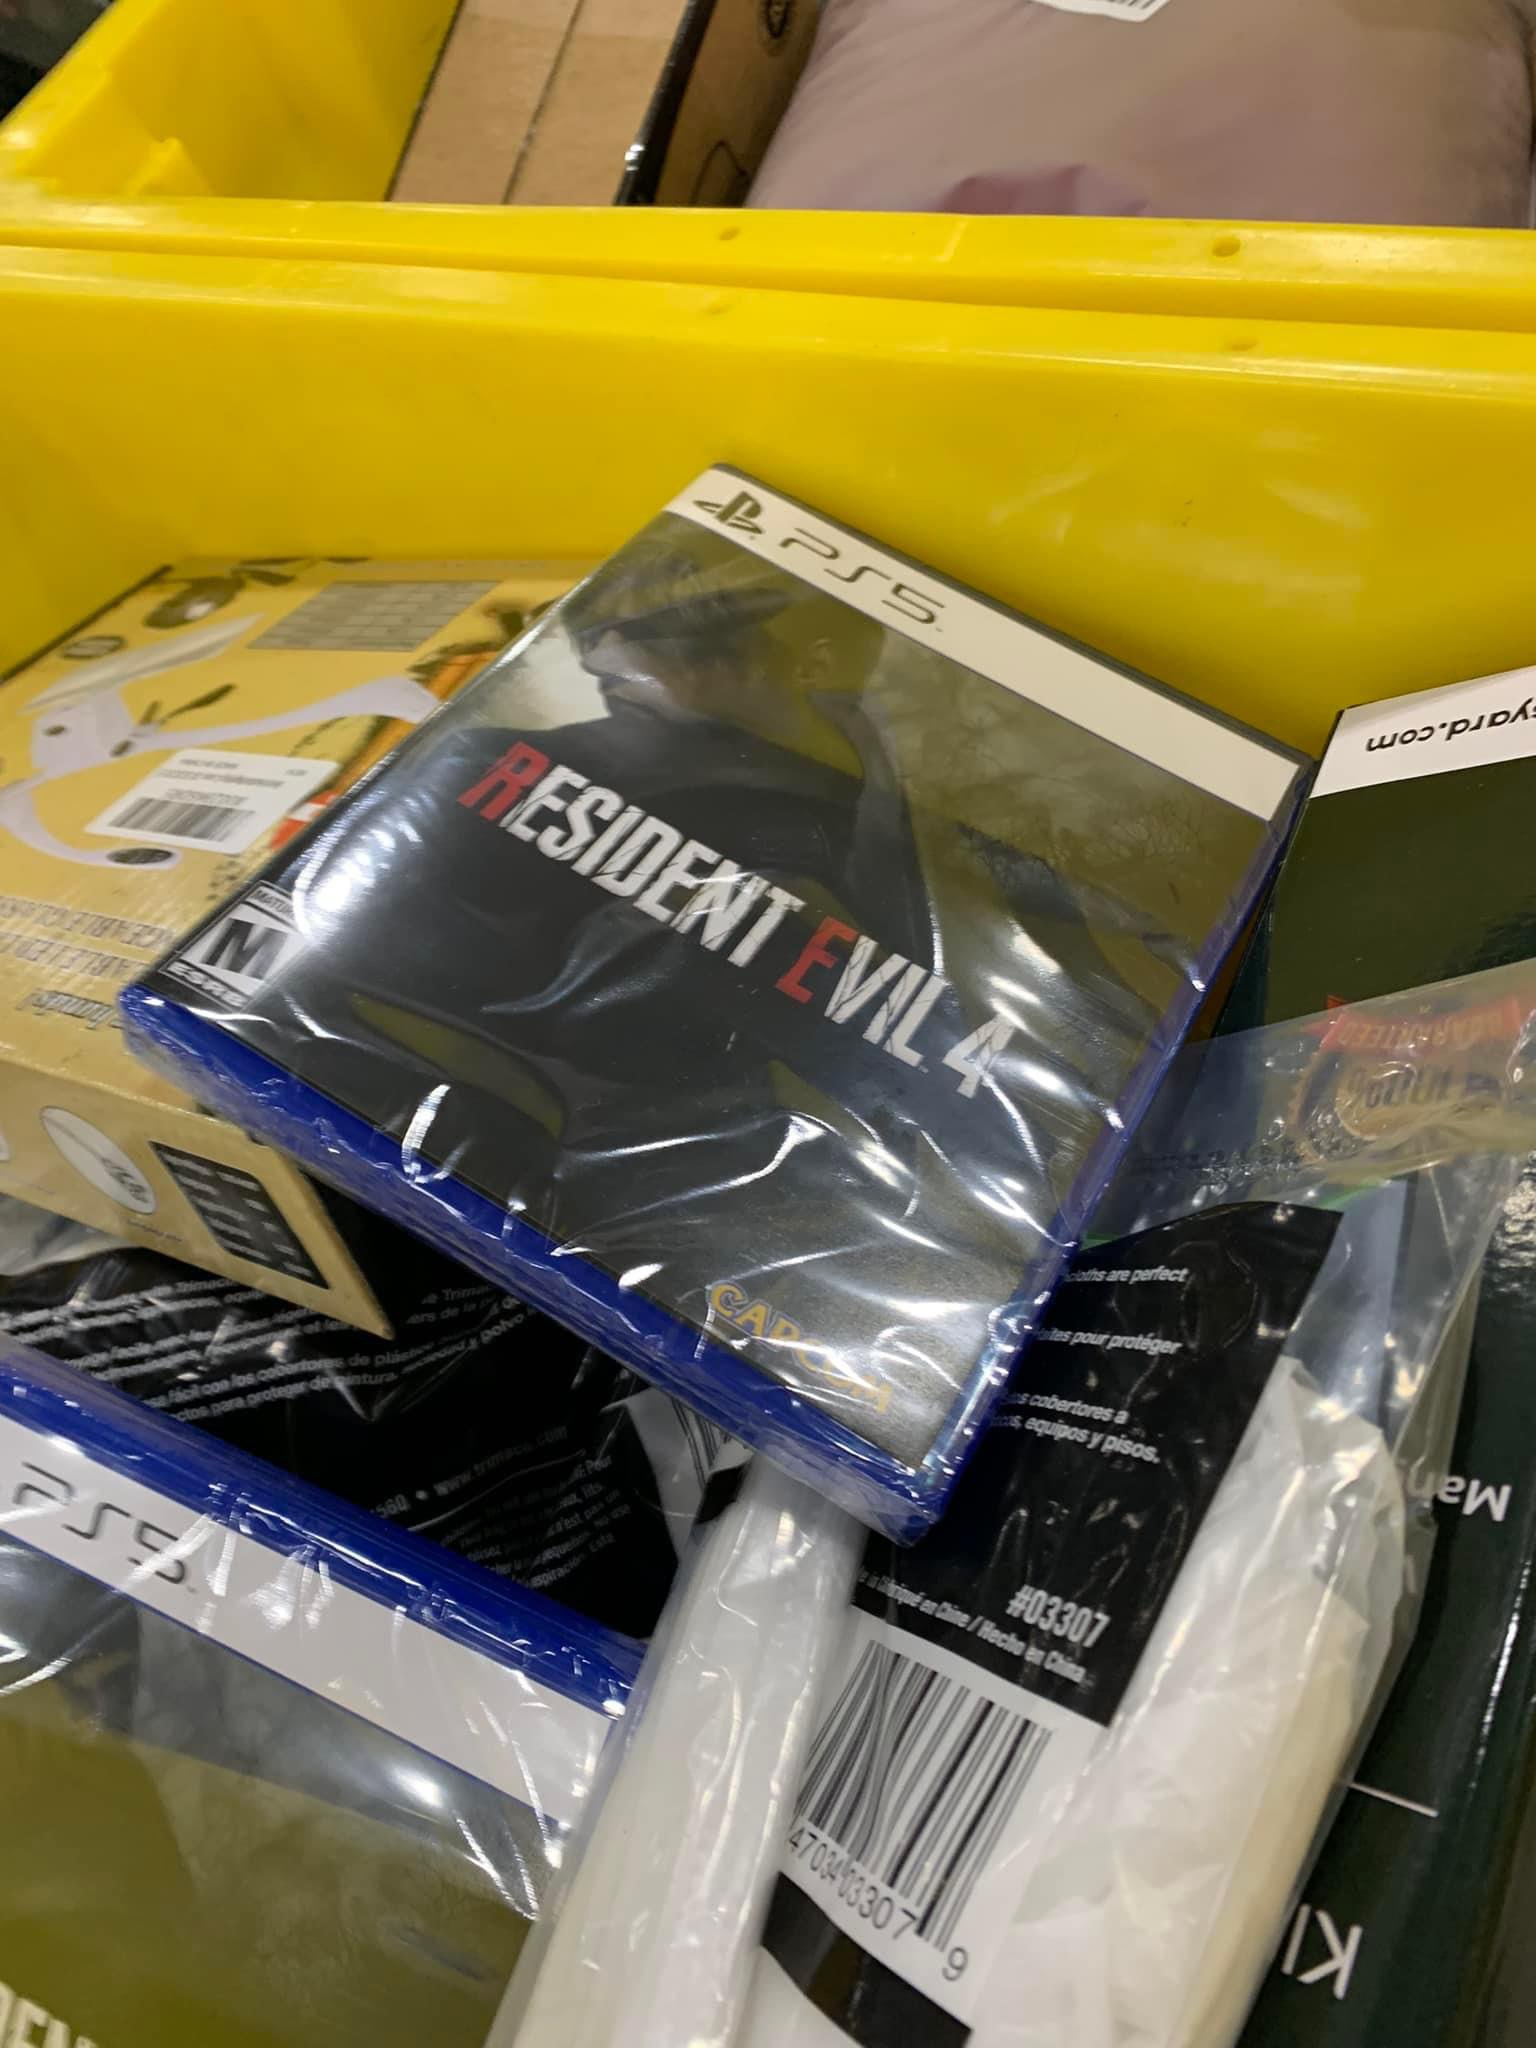 Physical Copies of the Resident Evil 4 Remake Out in the Wild